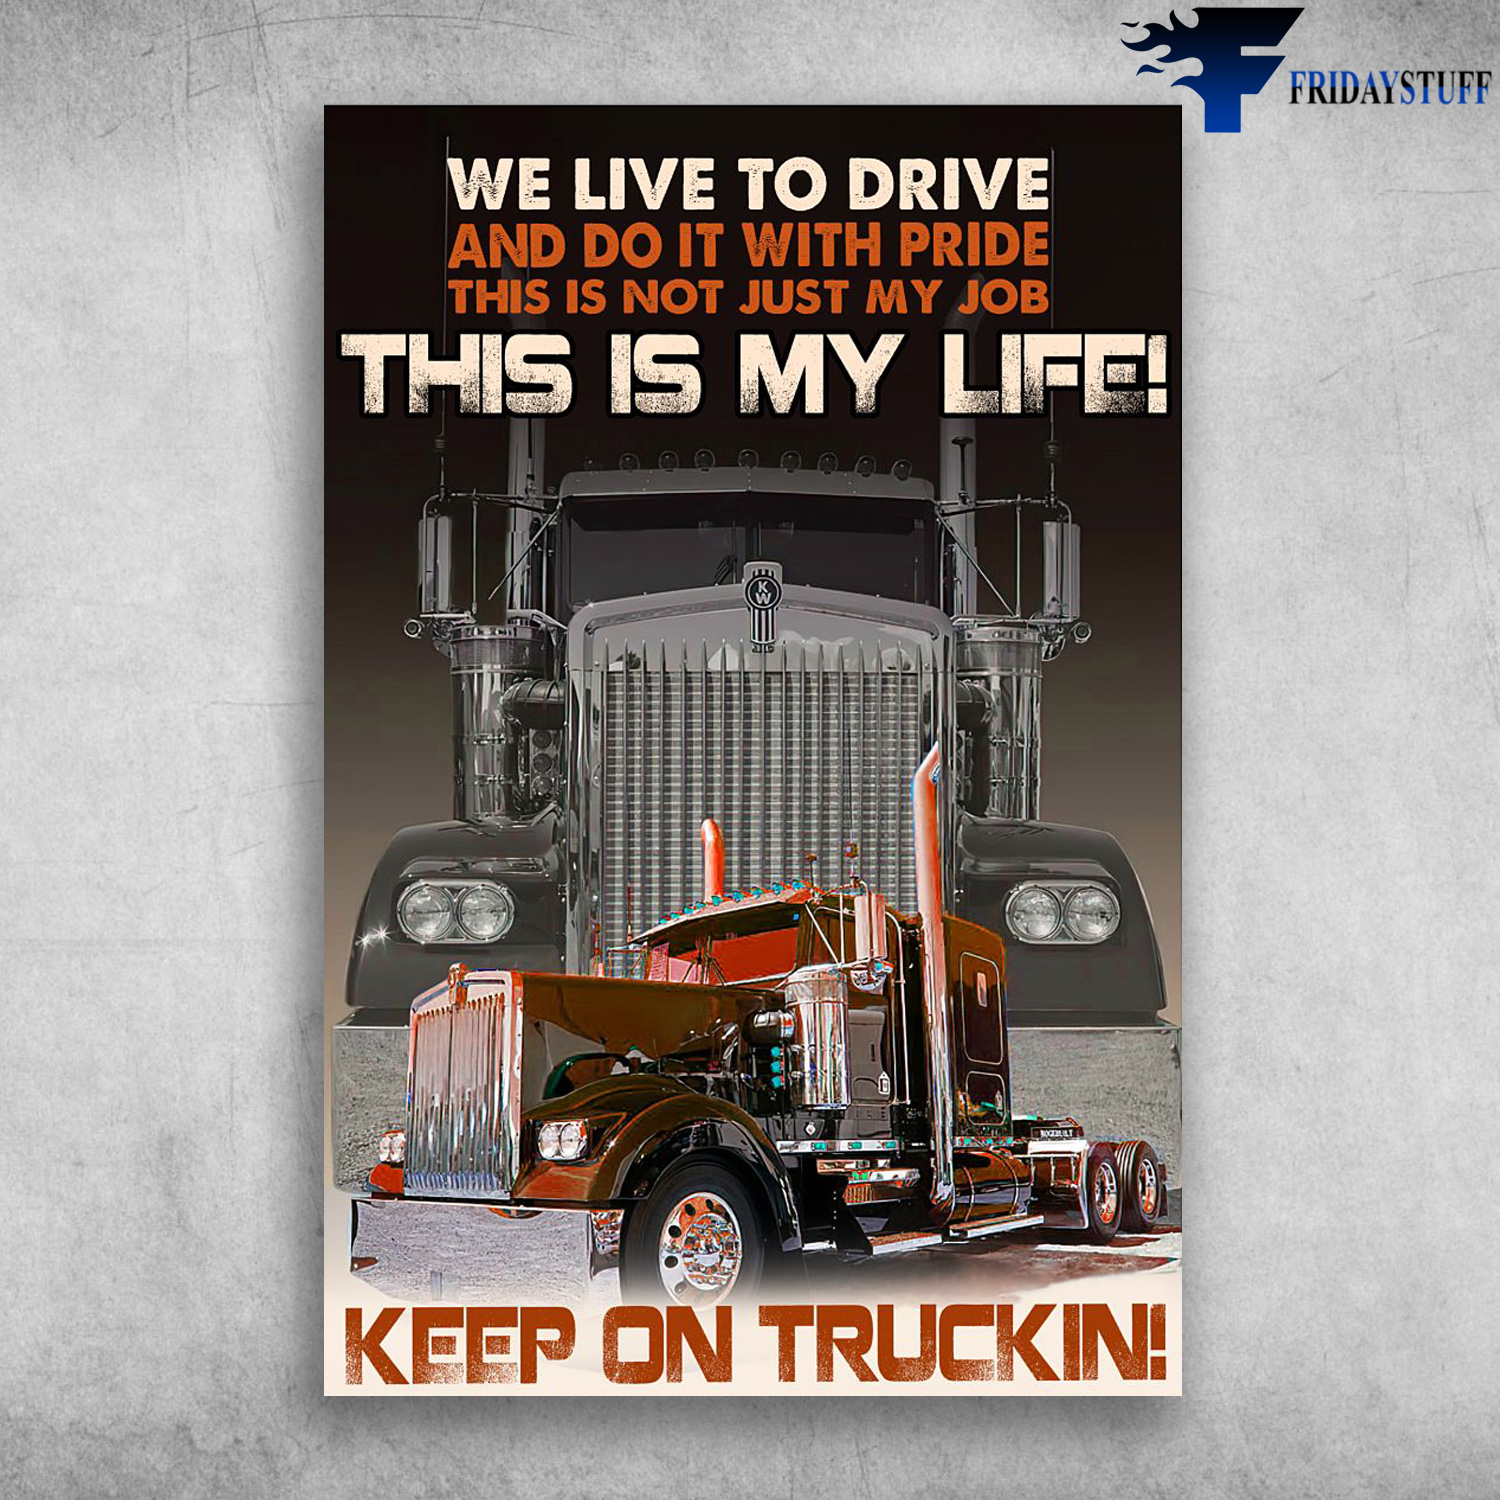 The Truck - We Live To Drive, And Do It With Pride, This Is Not Just My Job, This Is My Life, Keep On Truckin